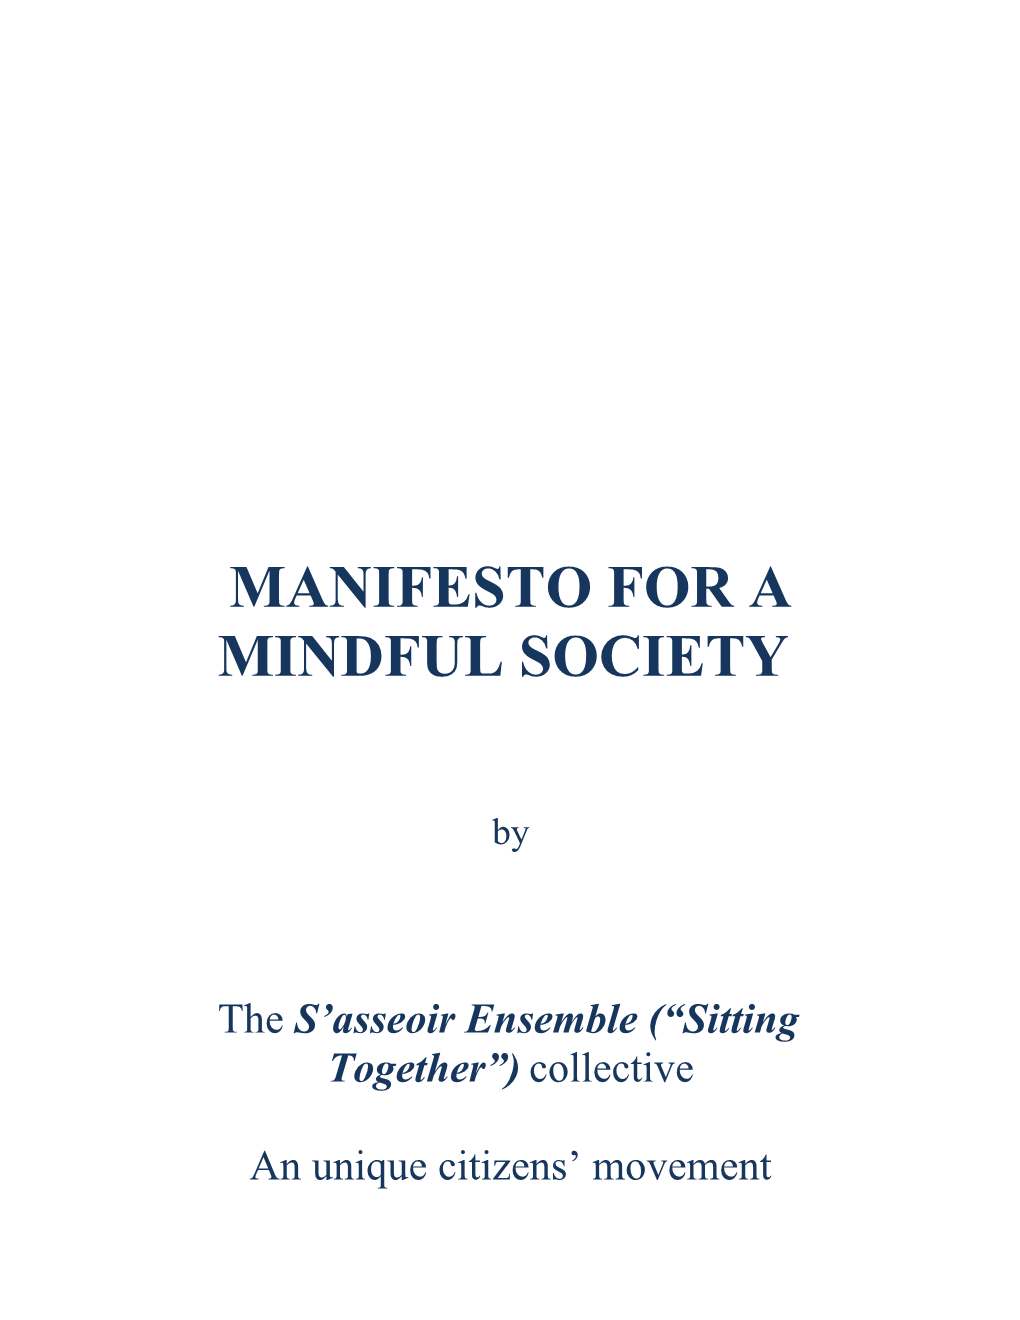 Manifesto for a Mindful Society